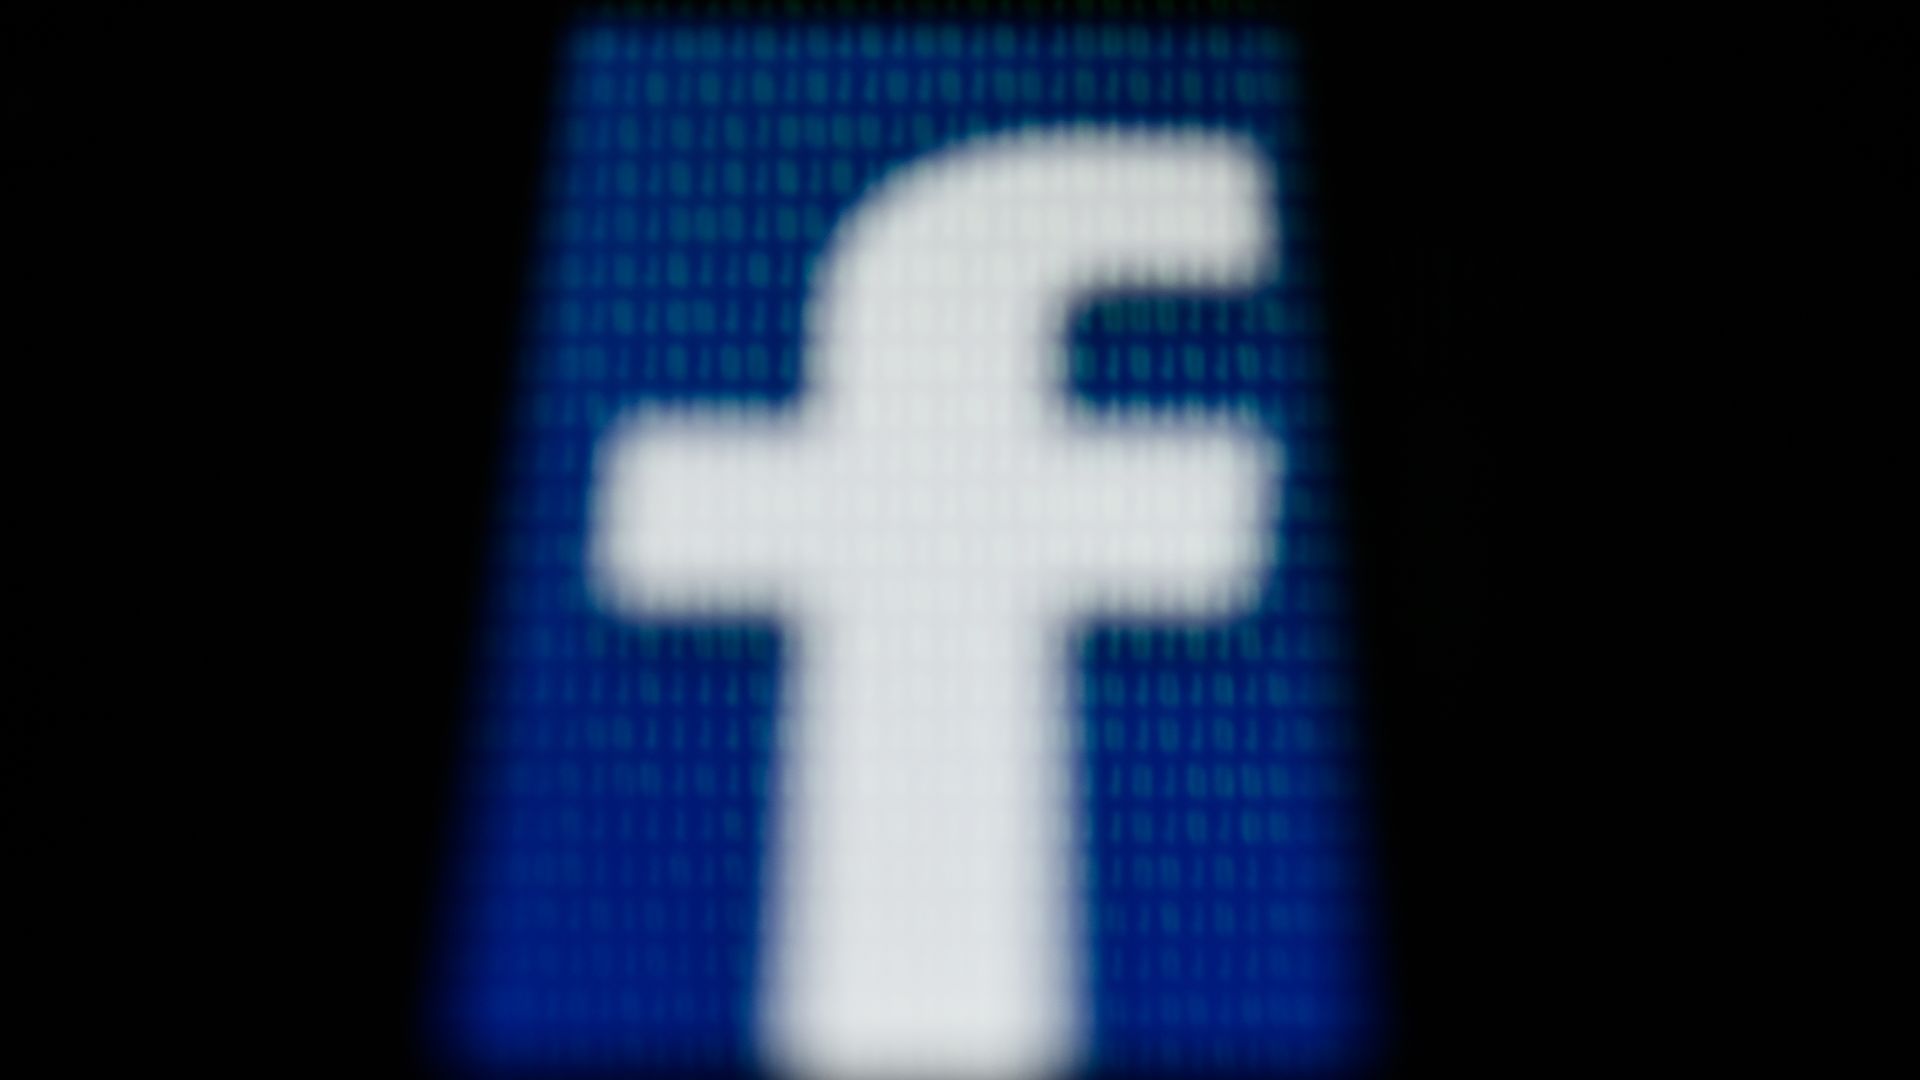 In this image, the F of the Facebook logo is seen on a phone pixelated with numbers.